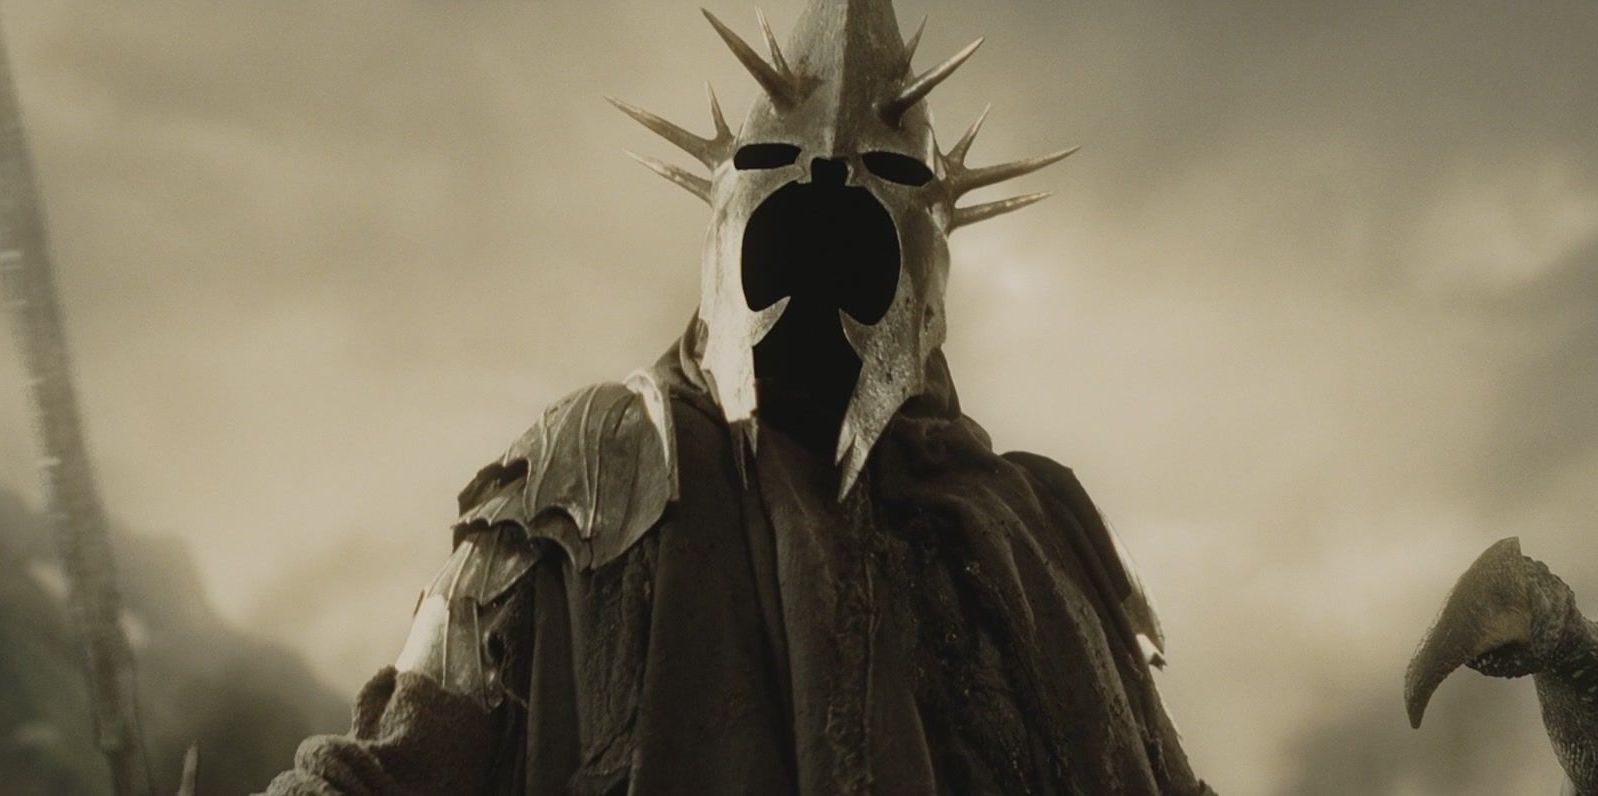 Witch-king of Angmar in Lord of the Rings